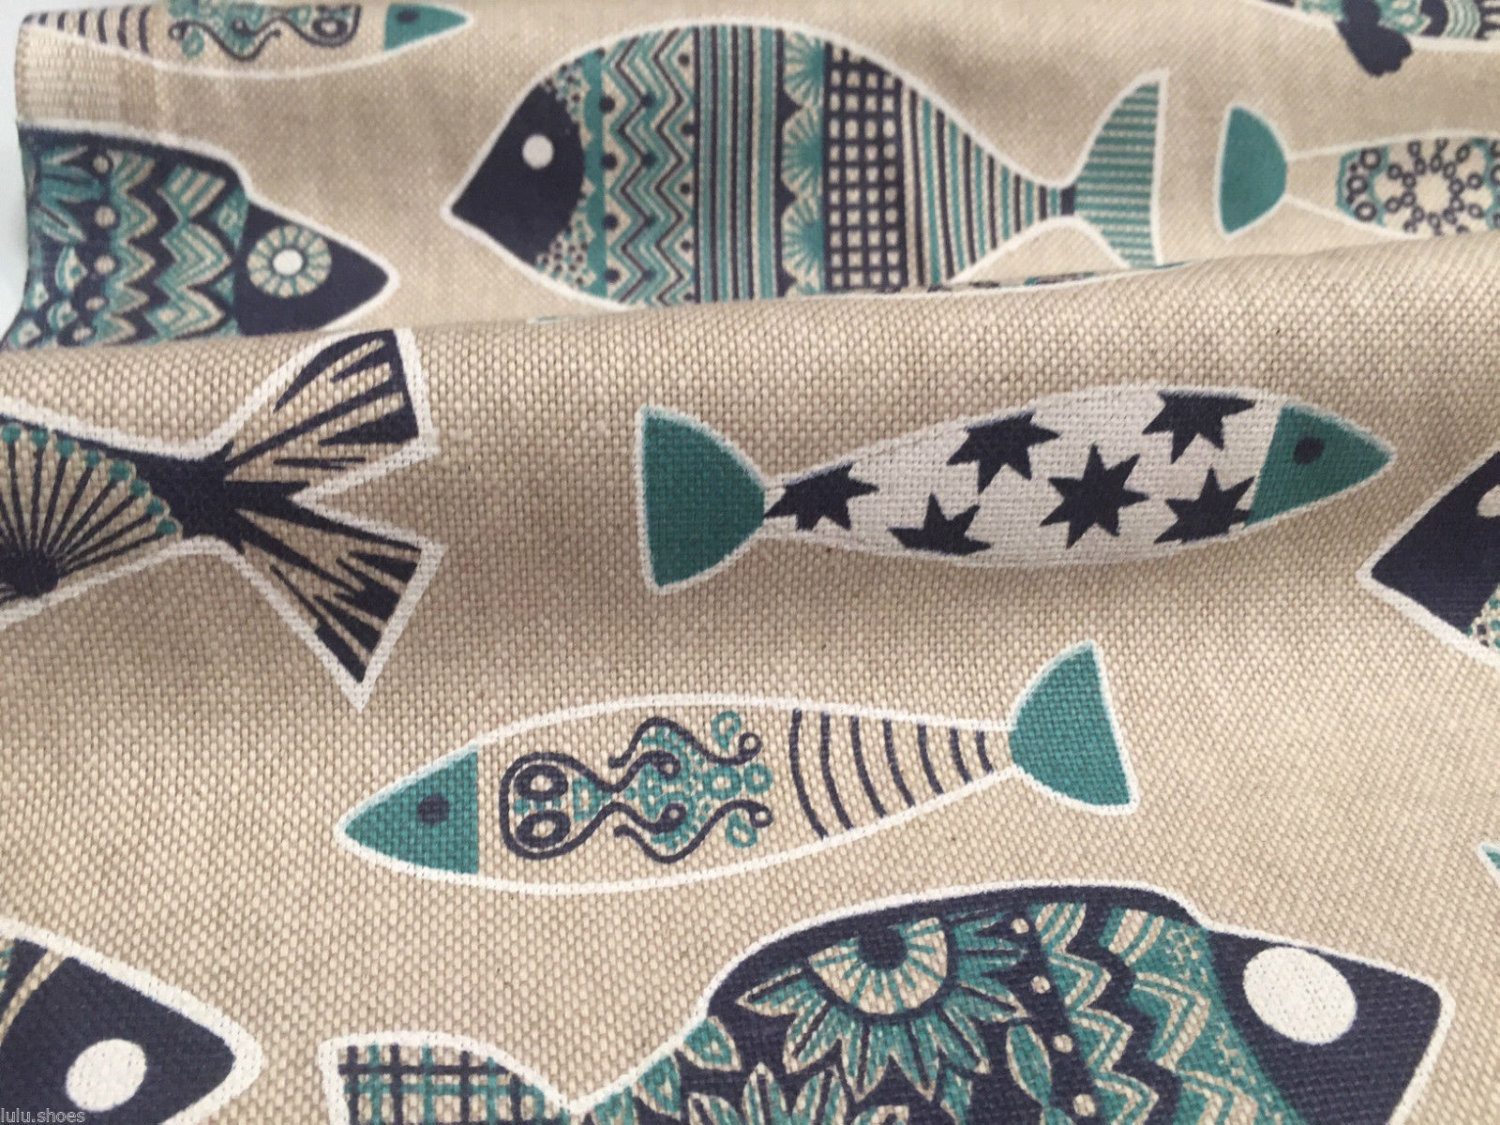 Blue Fish Marine Fabric Linen Look Home Decor Curtain Upholstery Material -  140cm or 55 wide canvas - Lush Fabric